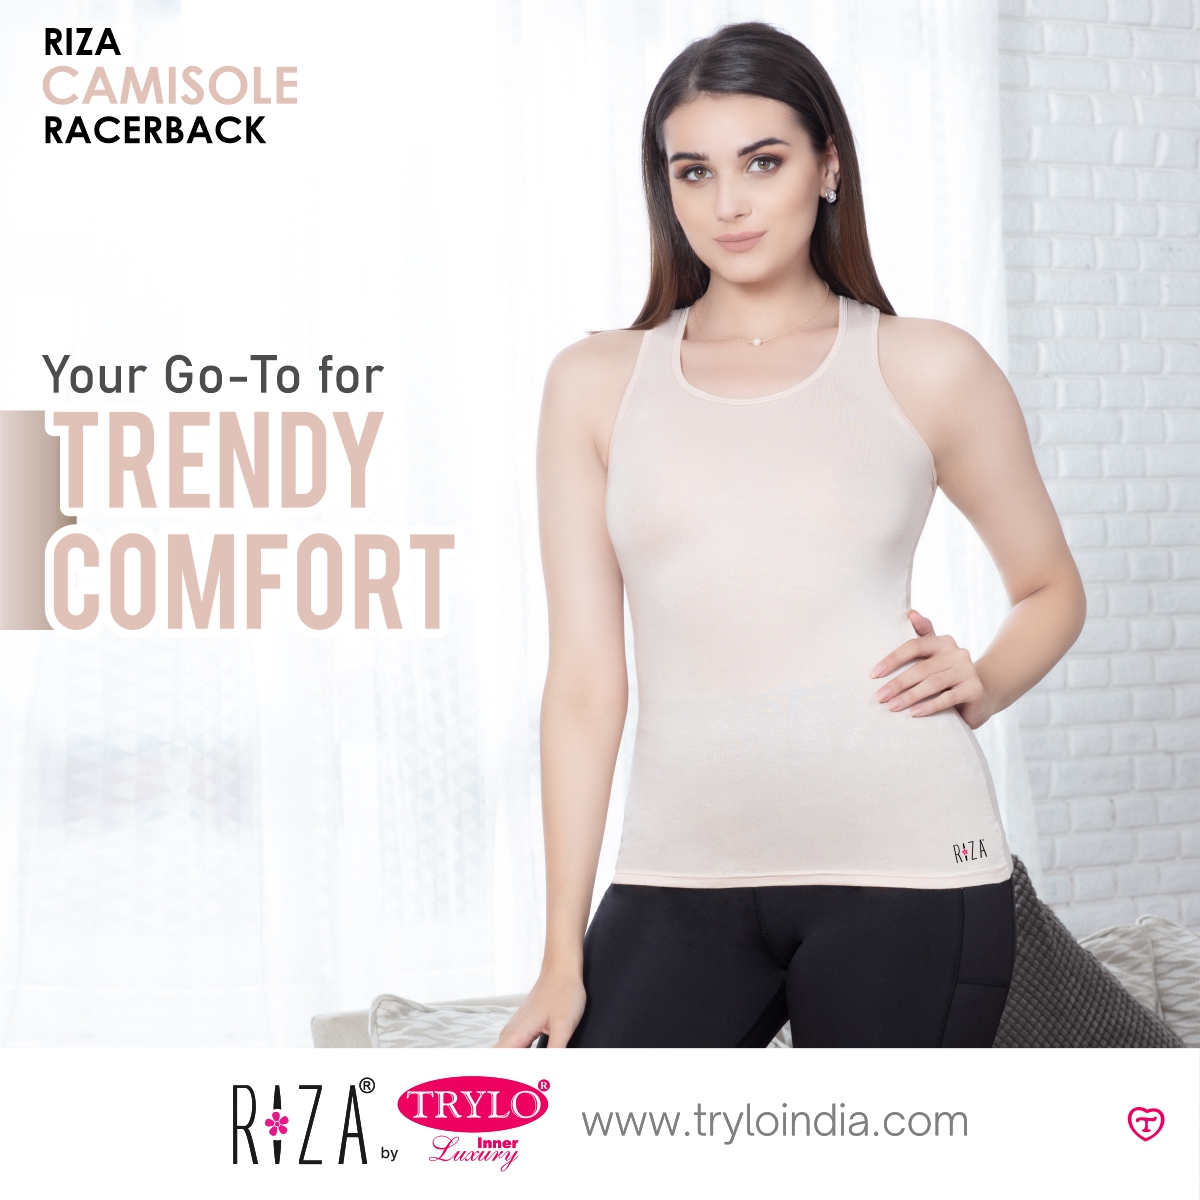 Experience ultimate comfort with Trylo's Riza Racerback Camisoles! Crafted from Modal Feel fabric with Spandex, it offers smoothness and style in one.

Product Shown:-  RIZA CAMISOLE RACER BACK

#TryloIndia #TryloIntimates #RizaIntimates #RizabyTrylo #TryloTrendy #ComfortInStyle